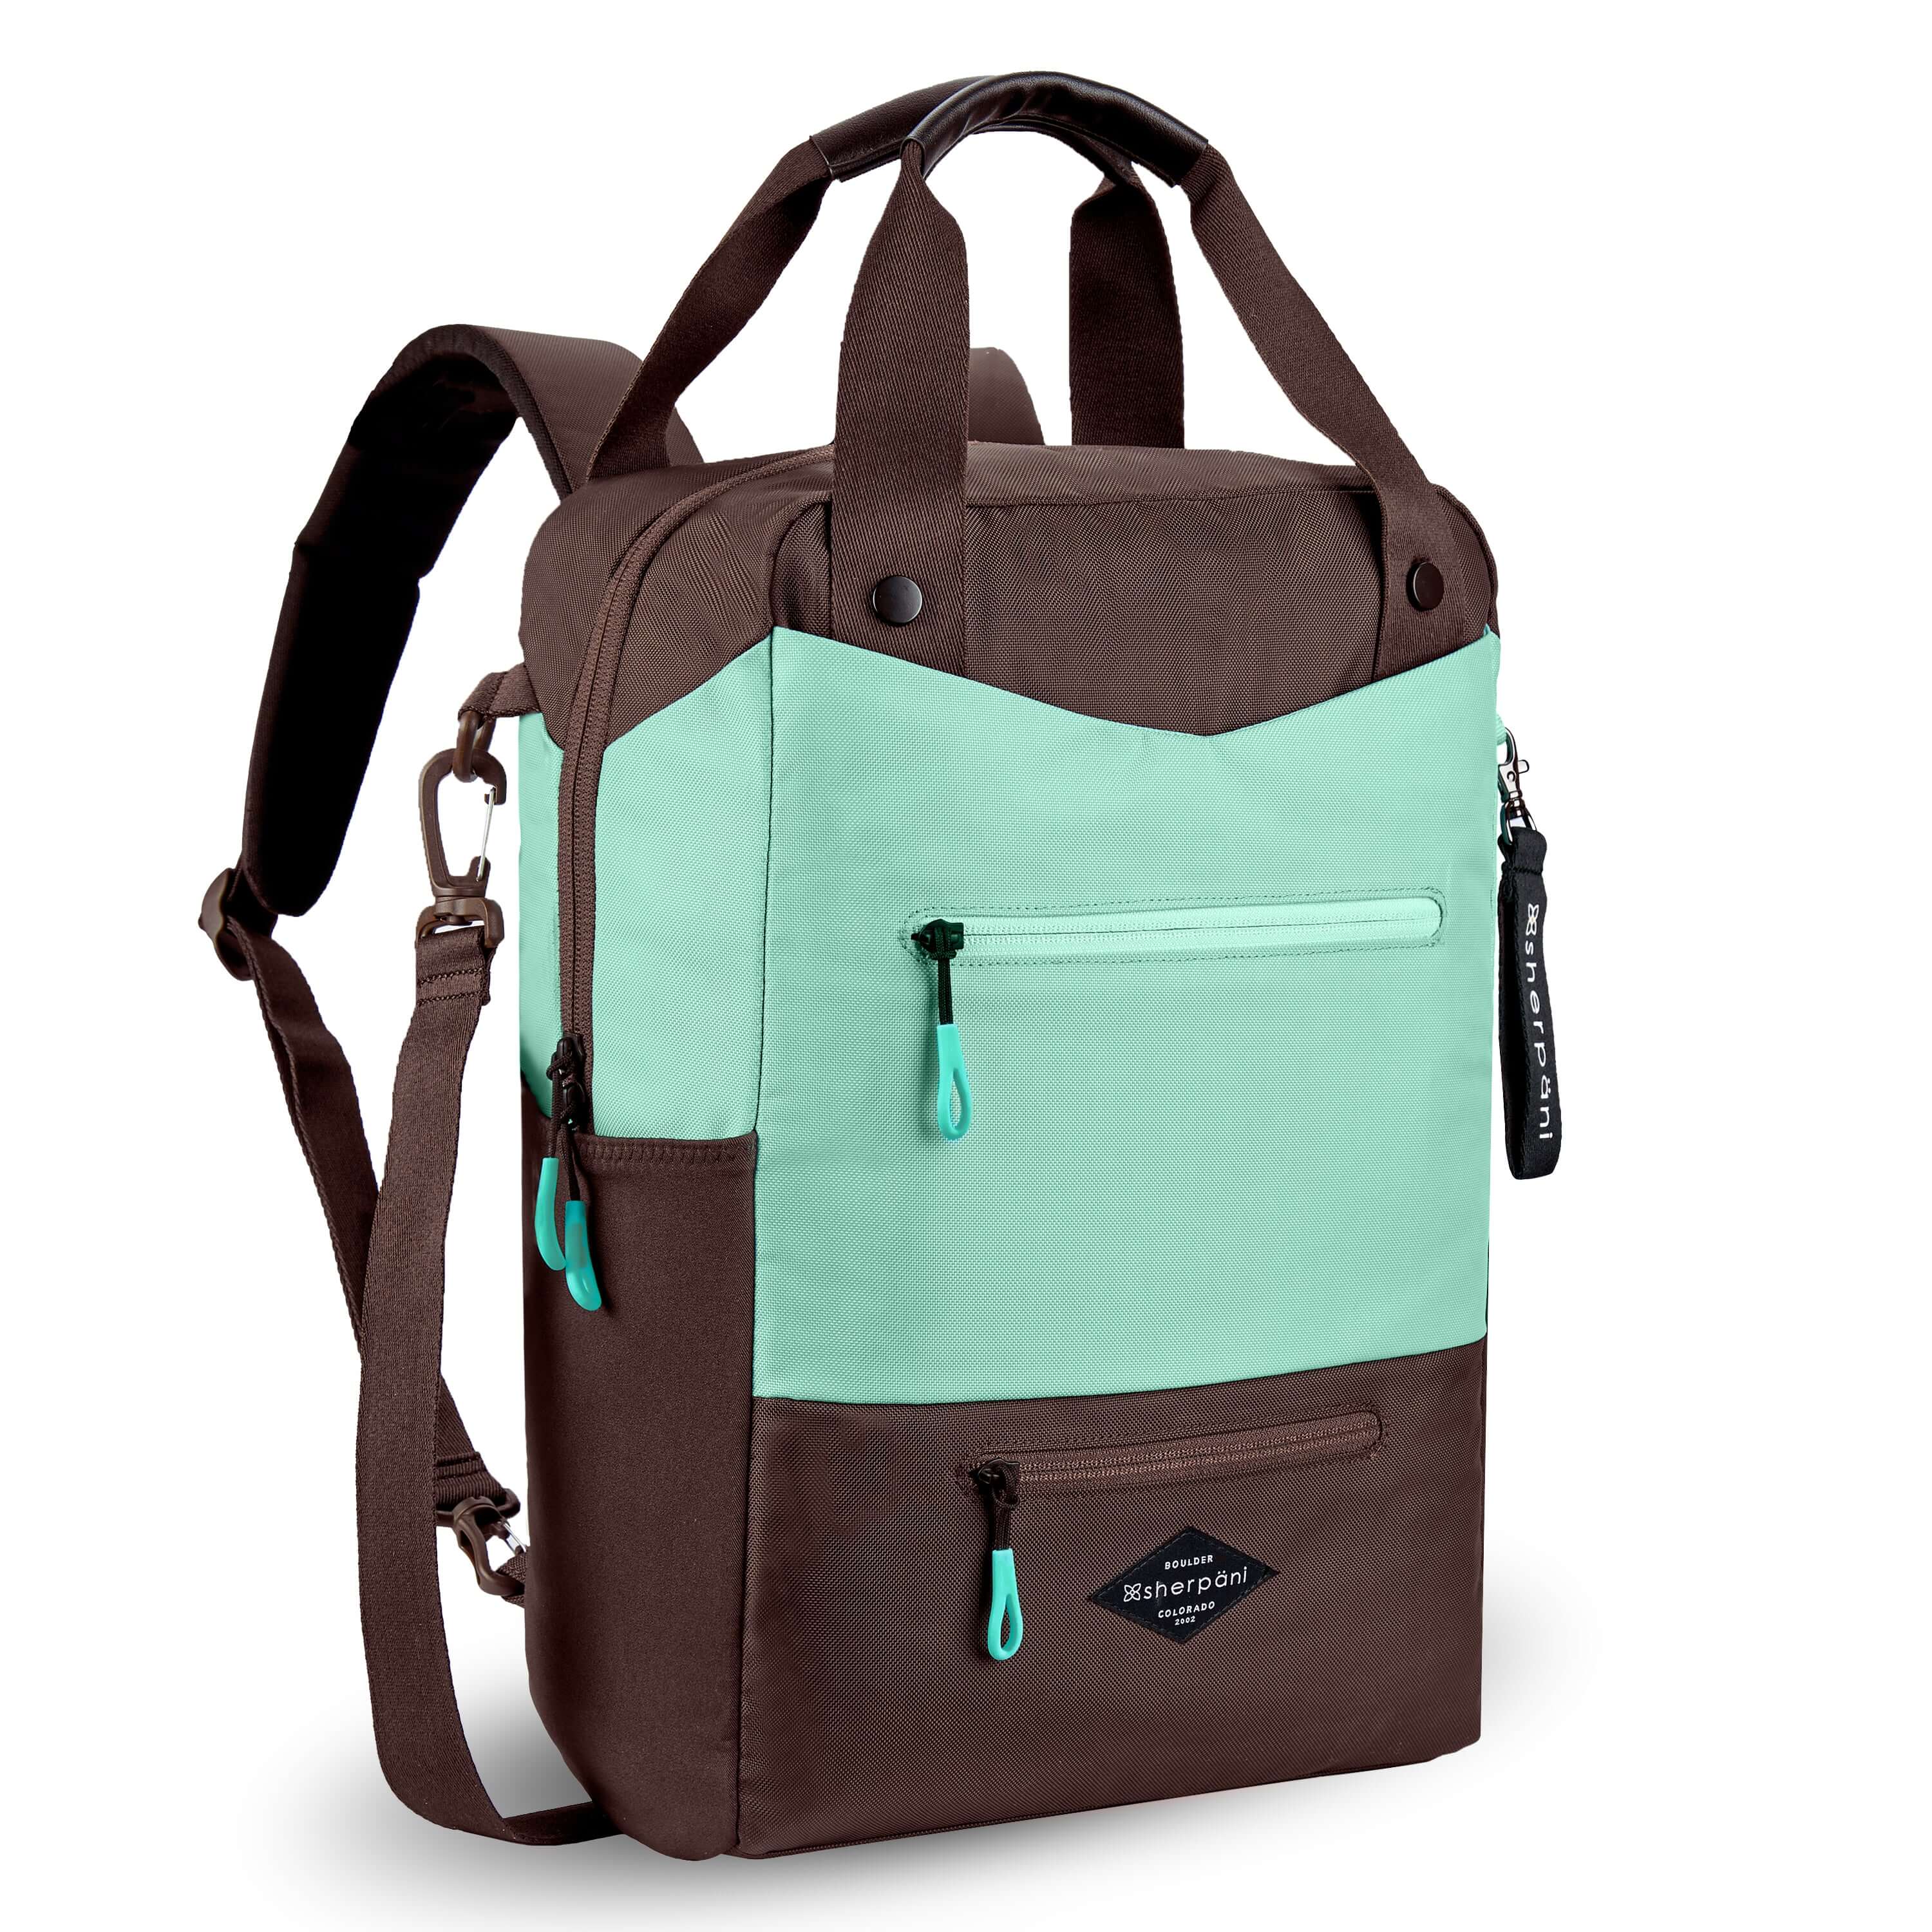 Angled front view of Sherpani&#39;s three-in-one bag, the Camden in Seagreen. The bag is two-toned in light green and brown. There are two external zipper pockets on the front panel with easy-pull zippers in light green. A branded Sherpani keychain is clipped to the upper right corner. An elastic water bottle holder sits on either side of the bag. The bag has an adjustable/detachable crossbody strap, padded/adjustable backpack straps and short tote handles fixed at the top.